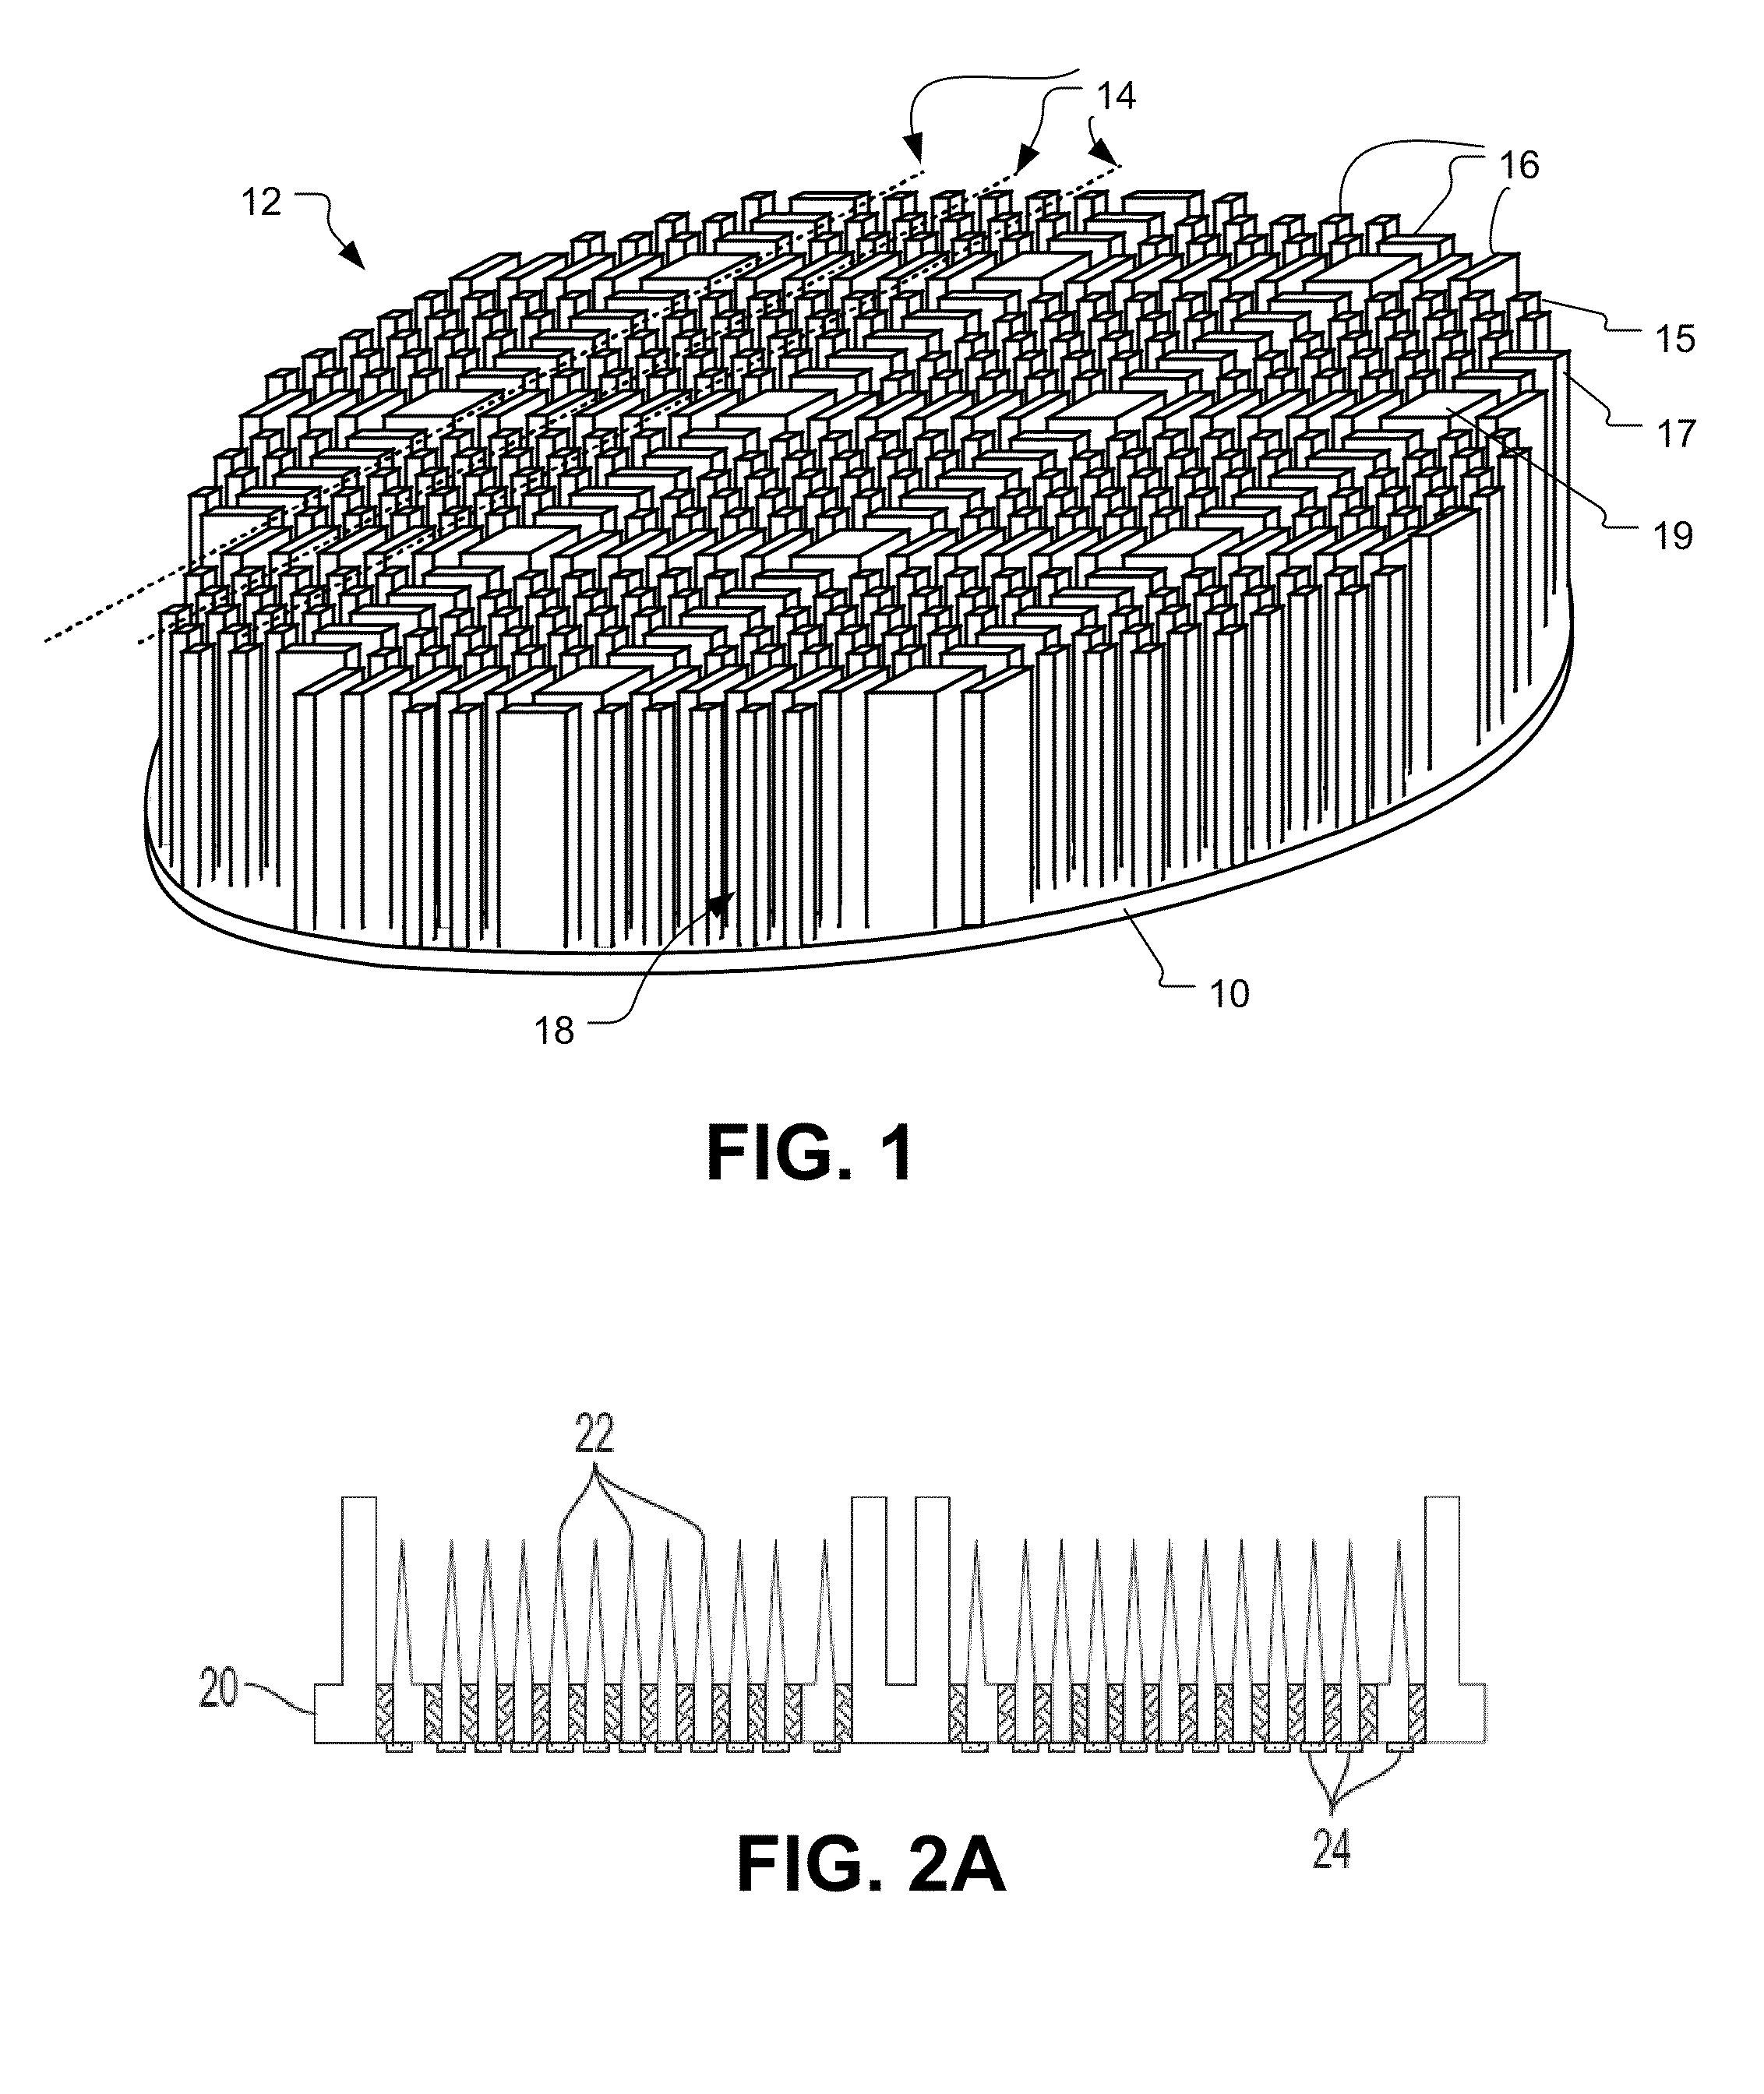 Methods for Wafer Scale Processing of Needle Array Devices